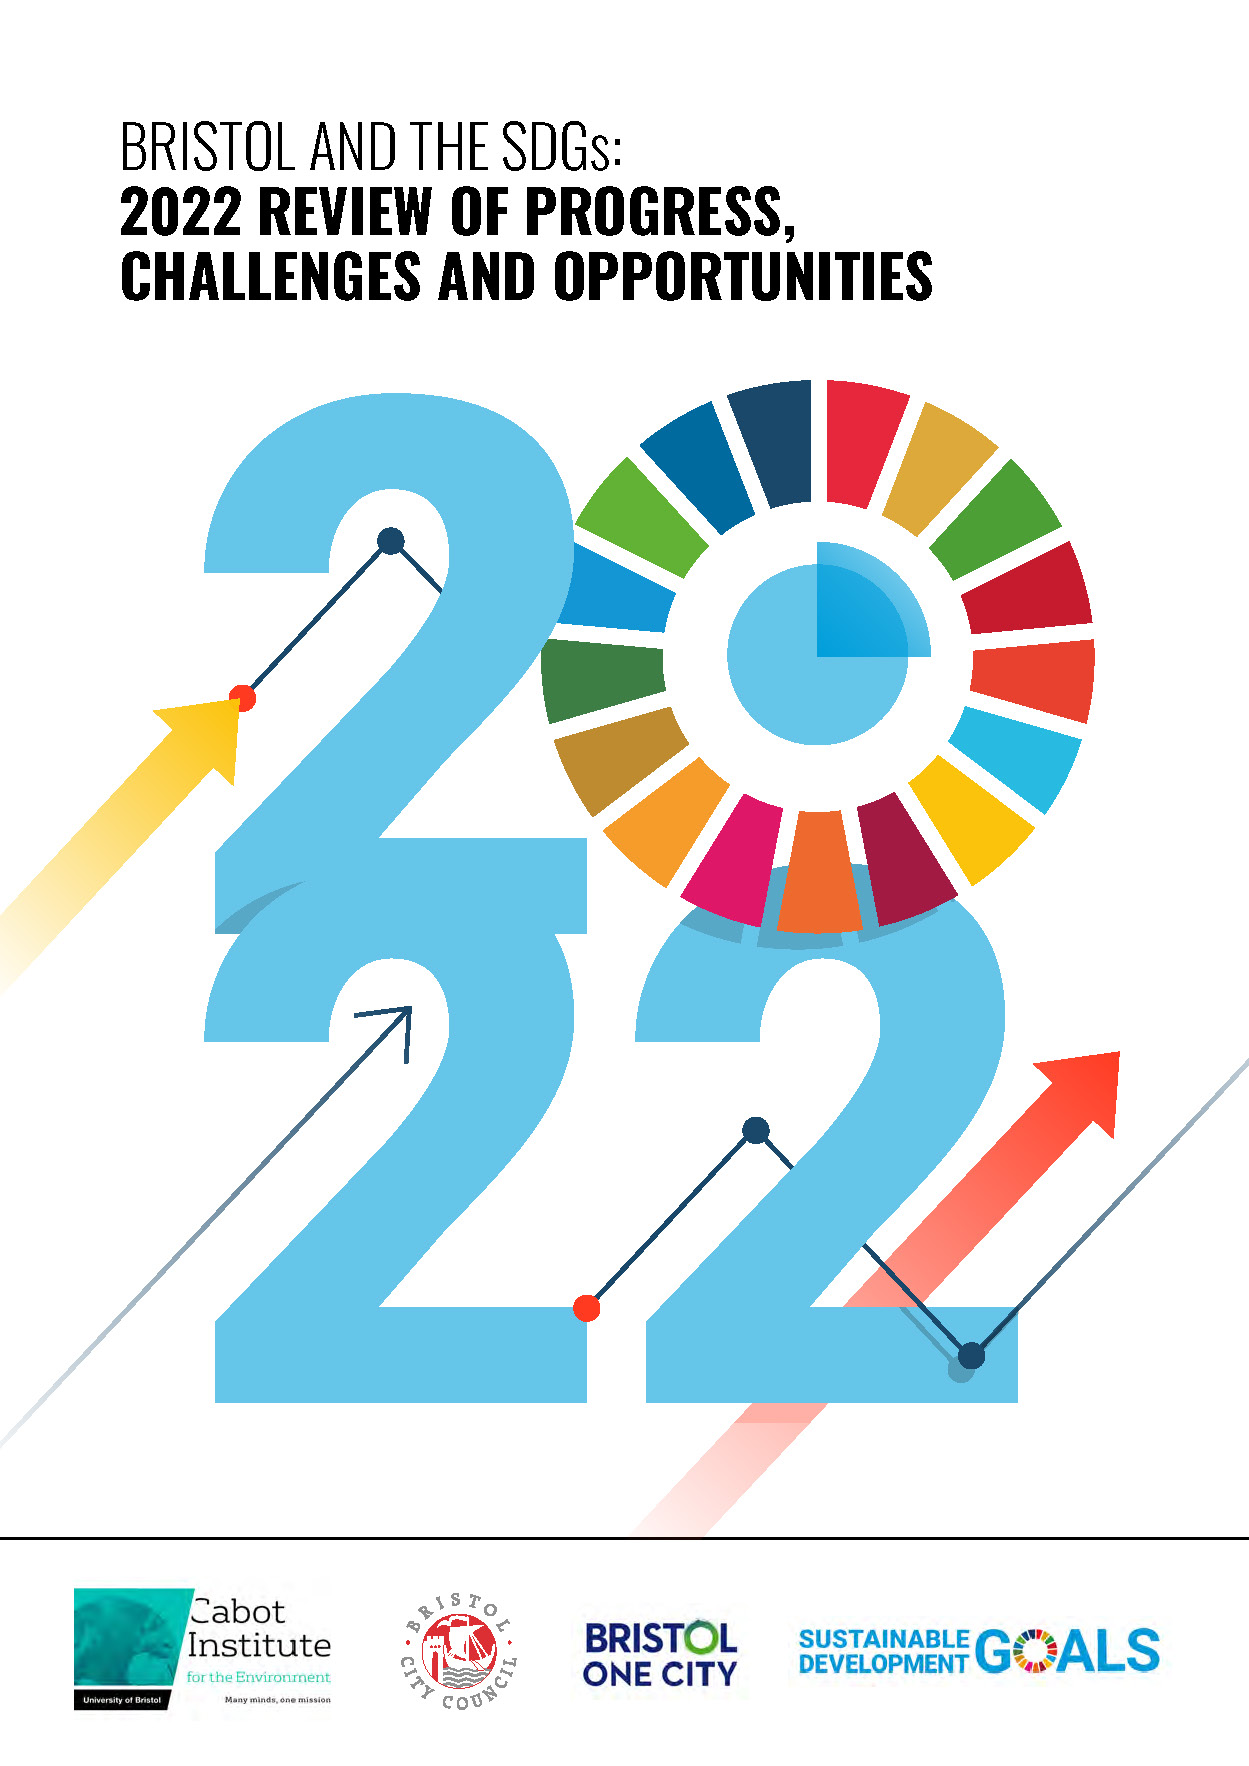 Bristol and the SDGs: 2022 Review of Progress, Challenges and Opportunities